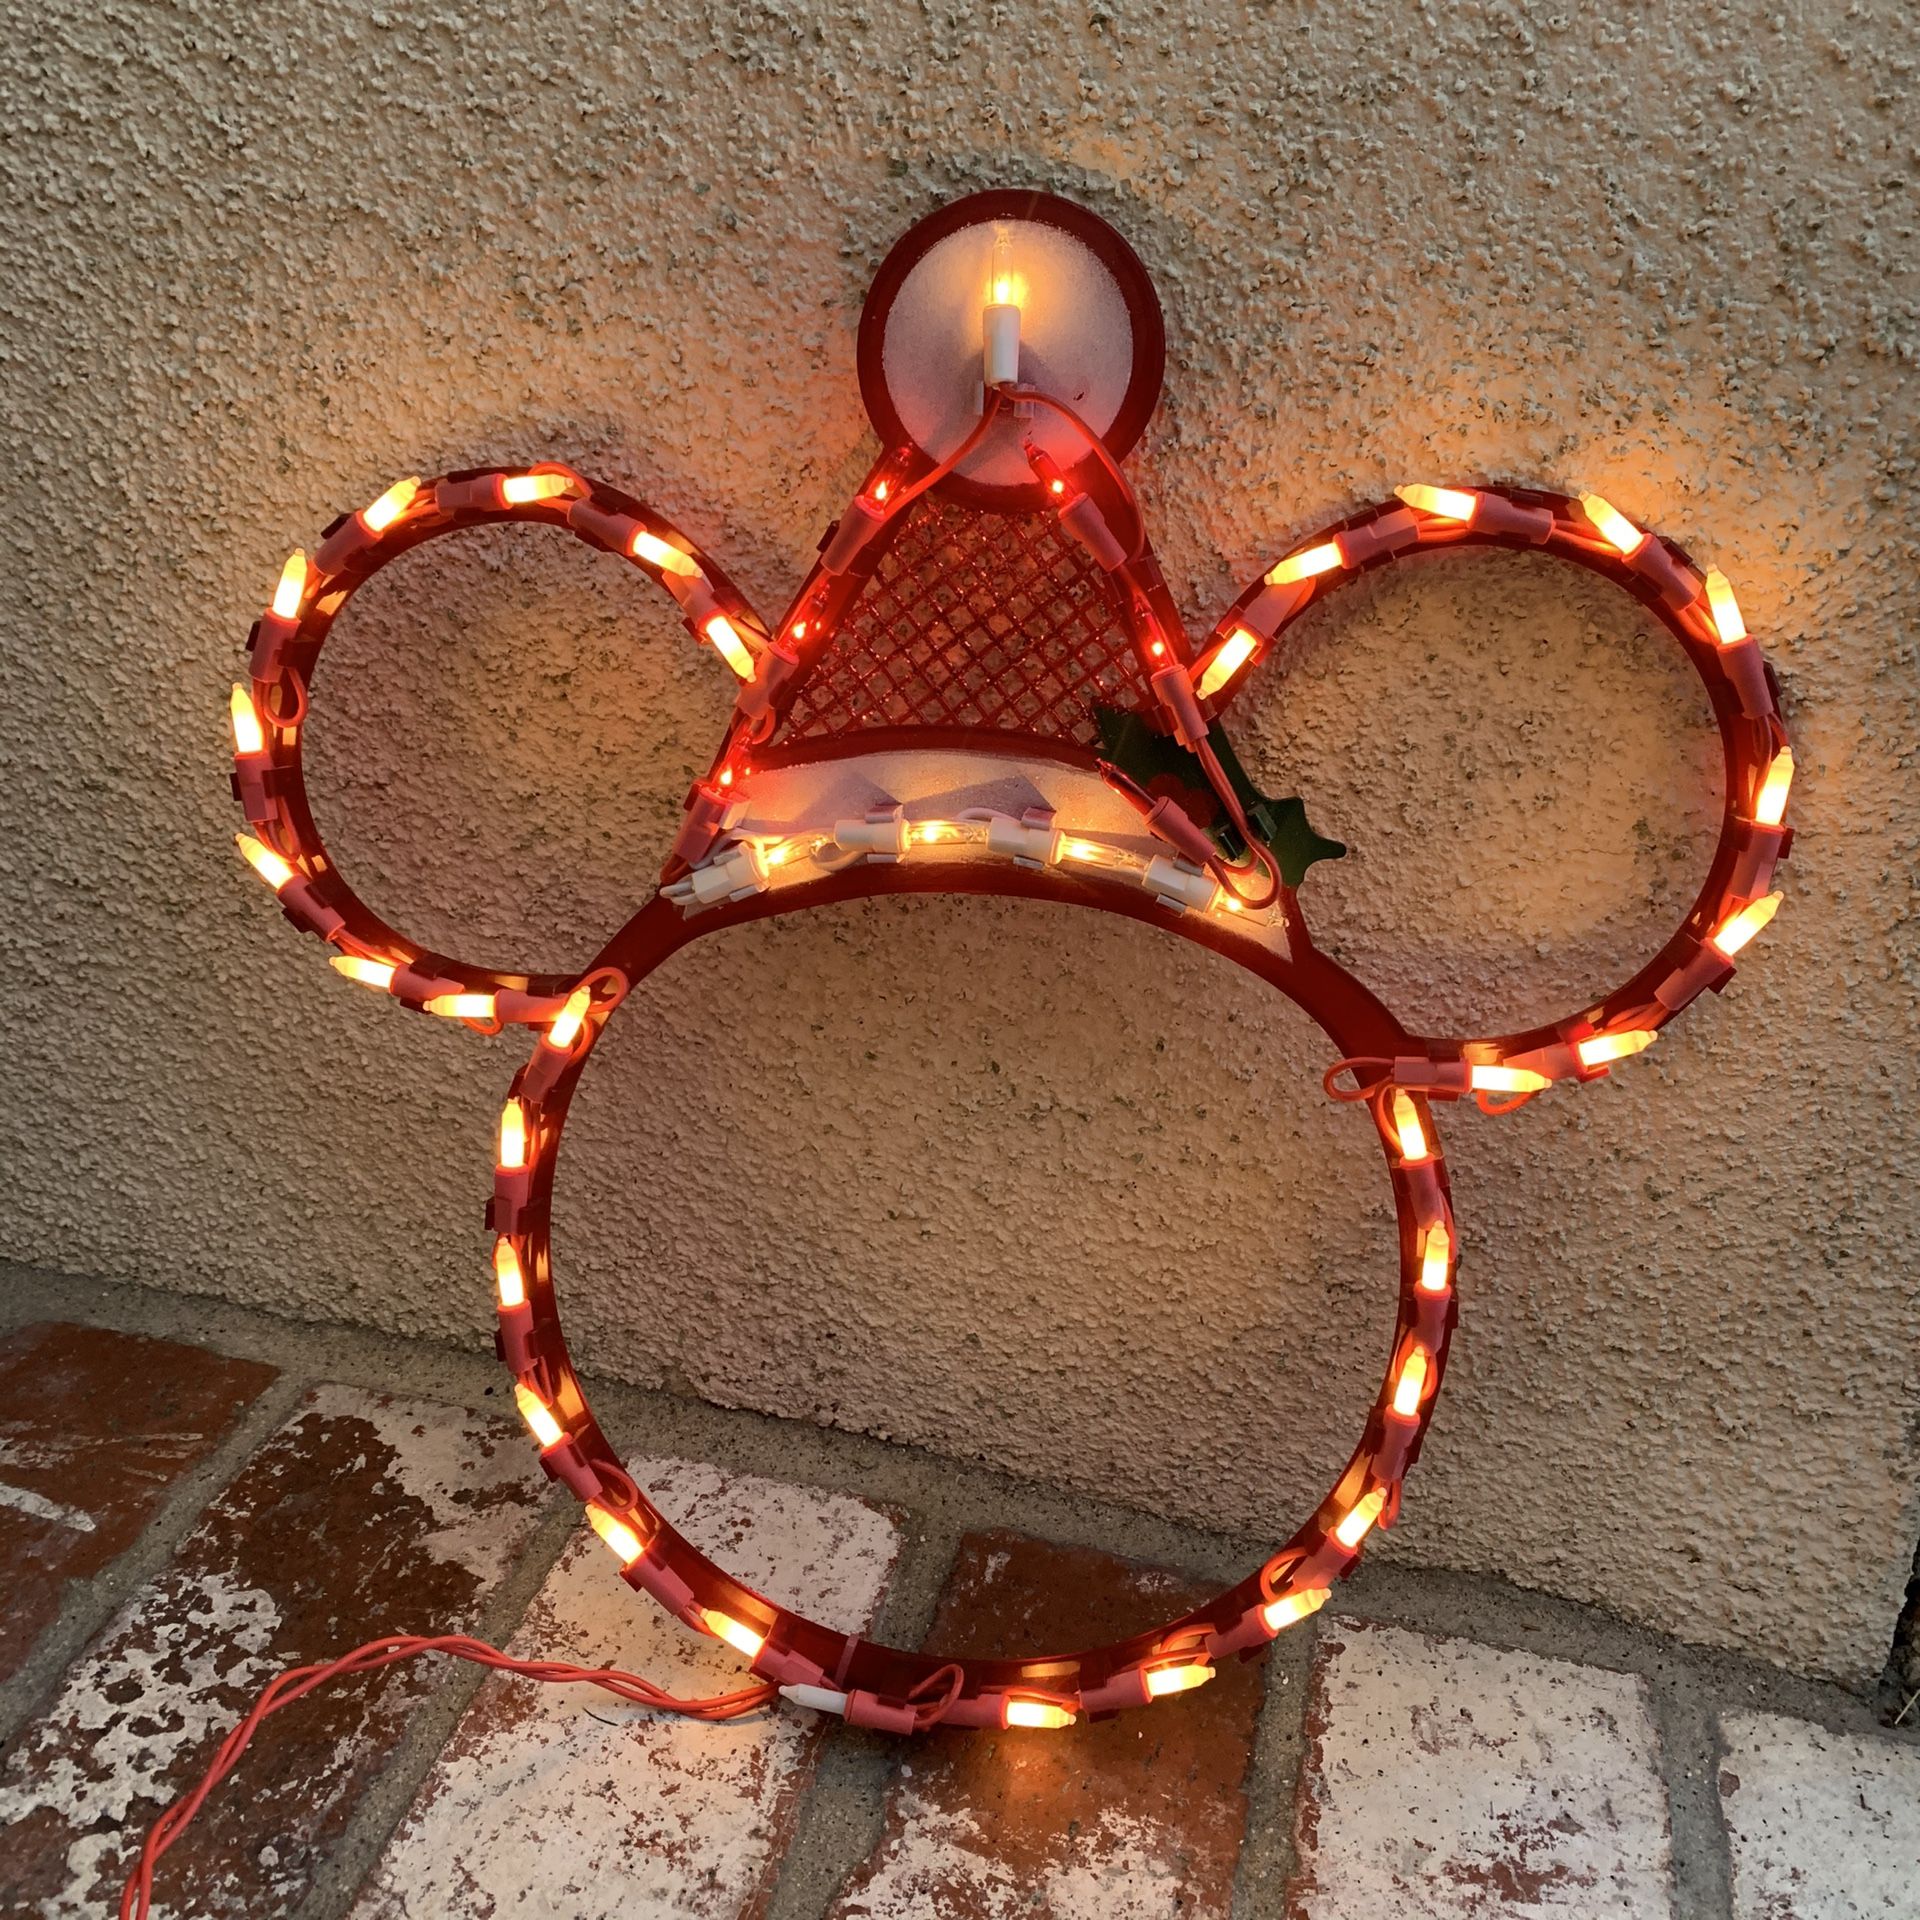 DISNEY LIGHT UP MICKEY HEAD CHRISTMAS DECORATION! ABOUT 12” TALL!